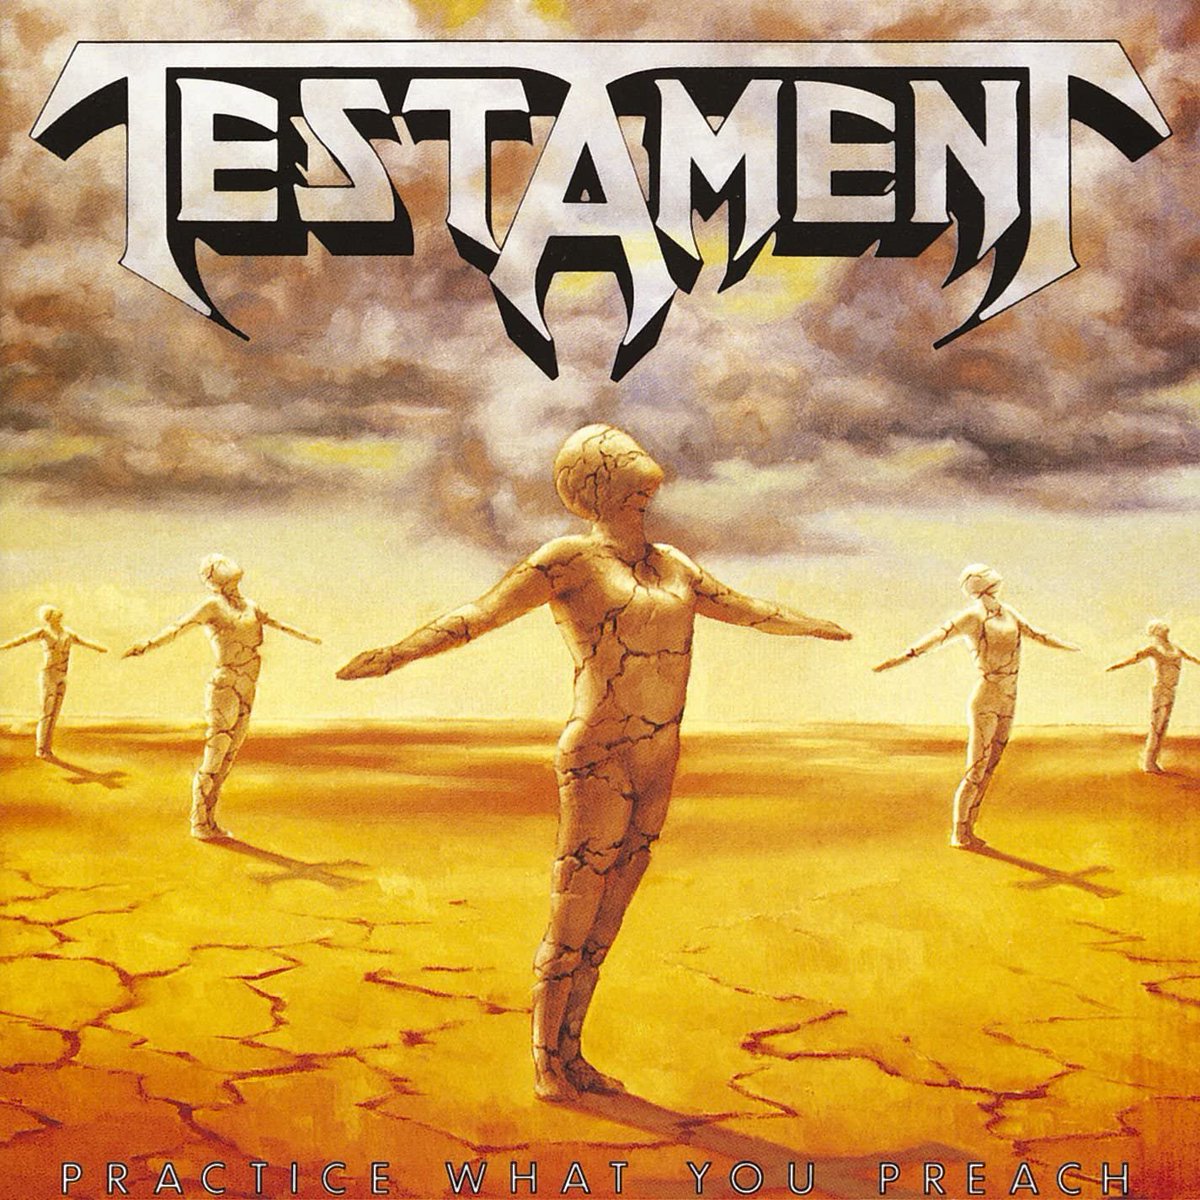 Aug 4th 1989 #Testament released the album 'Practice What You Preach' #GreenhouseEffect #TheBallad #TimeIsComing #EnvyLife #ThrashMetal 

Did you know...
The album entered the Billboard 200 album charts a month after its release, peaking at number 77.